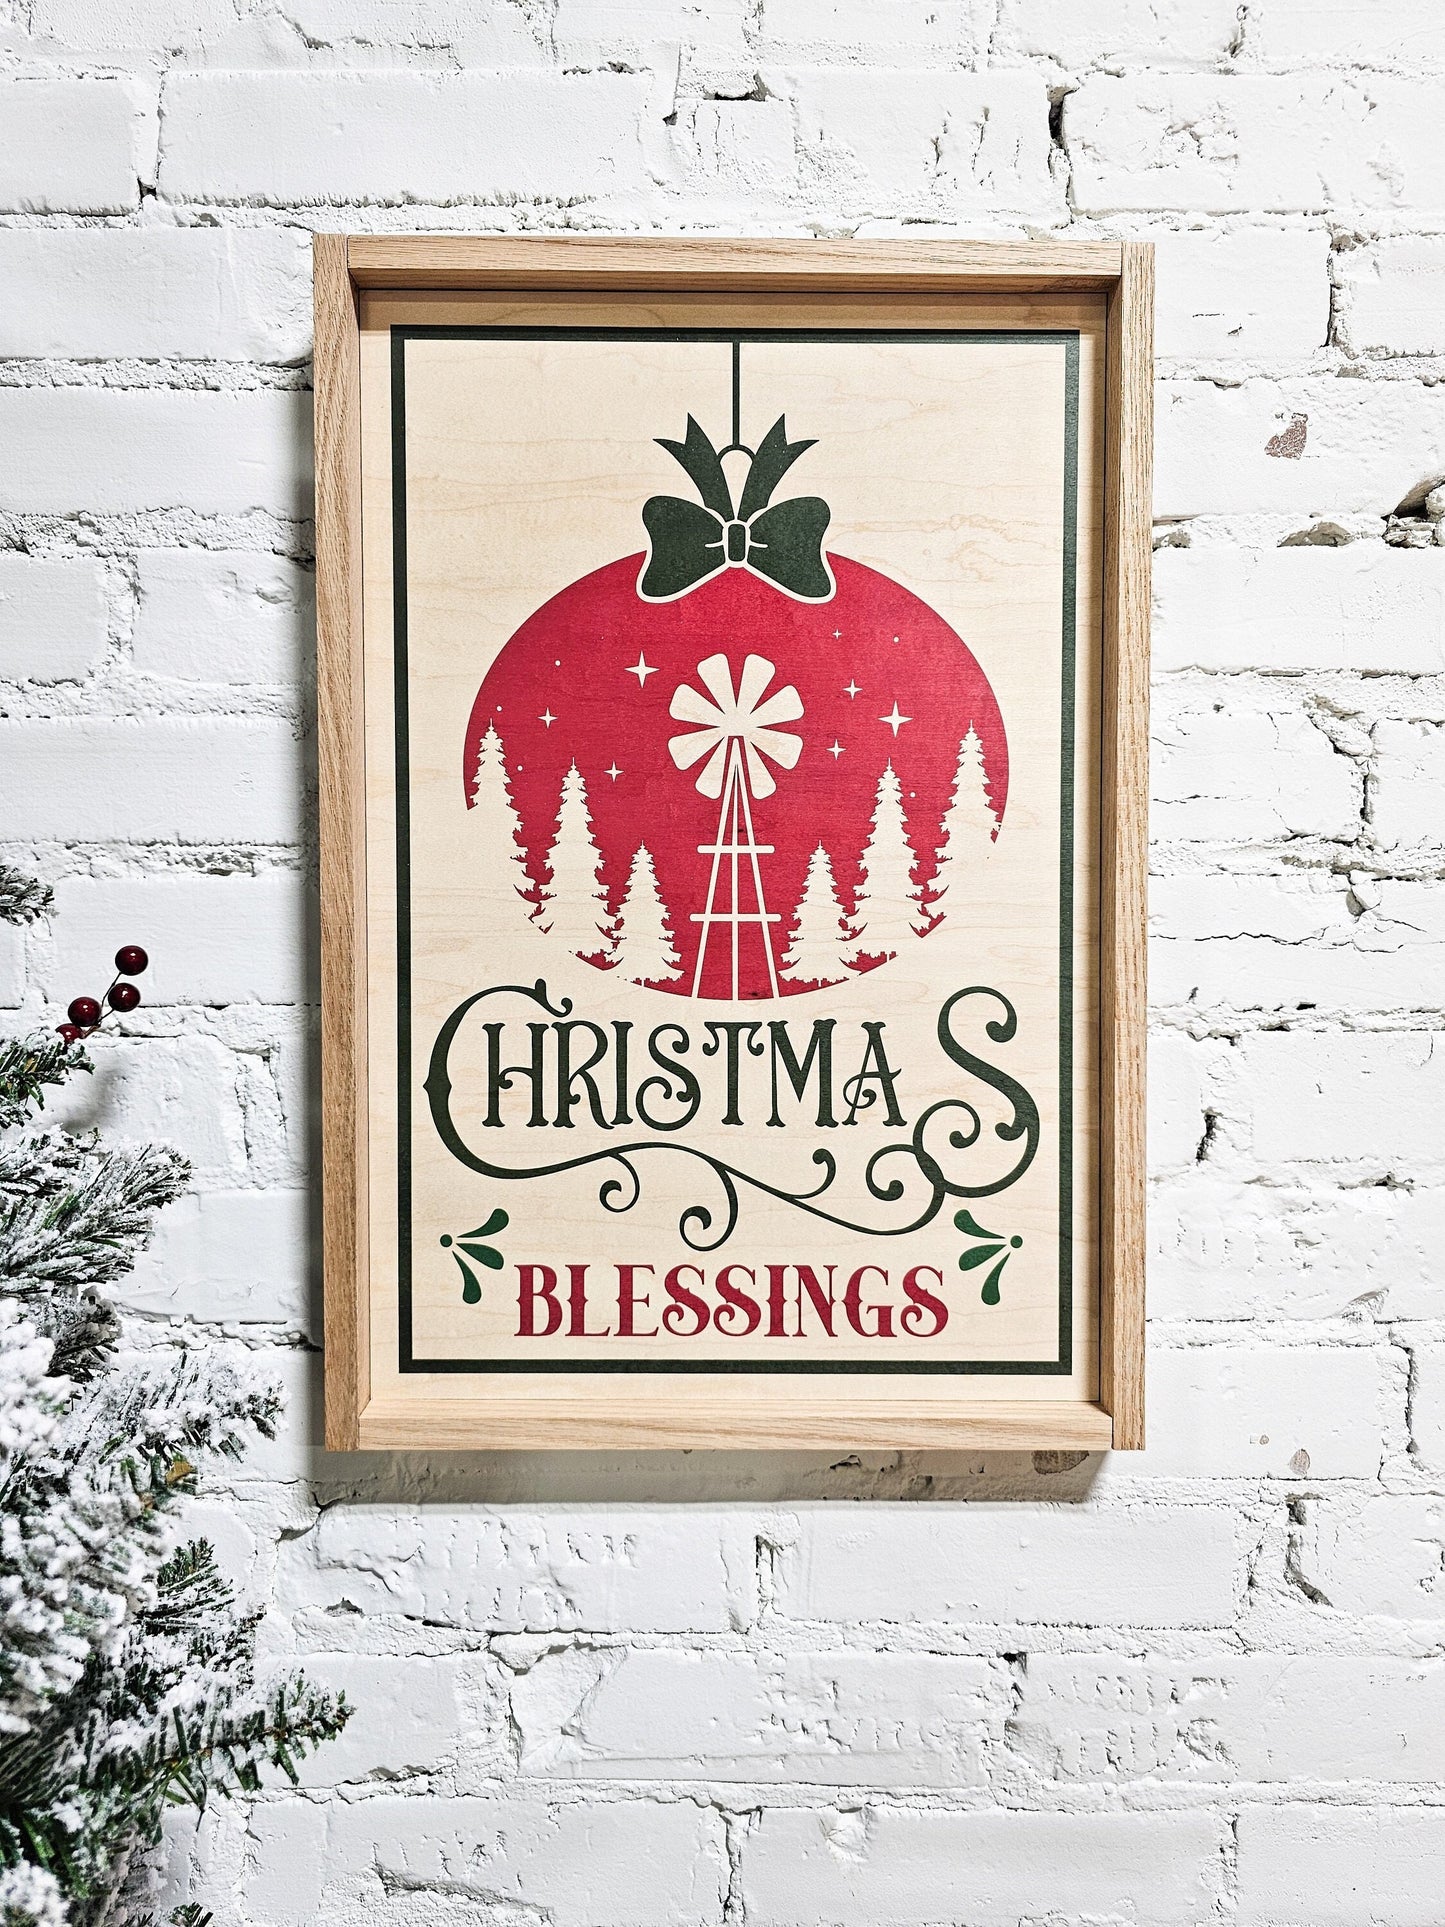 Christmas blessing wooden sign, framed, christmas holiday decor for wall